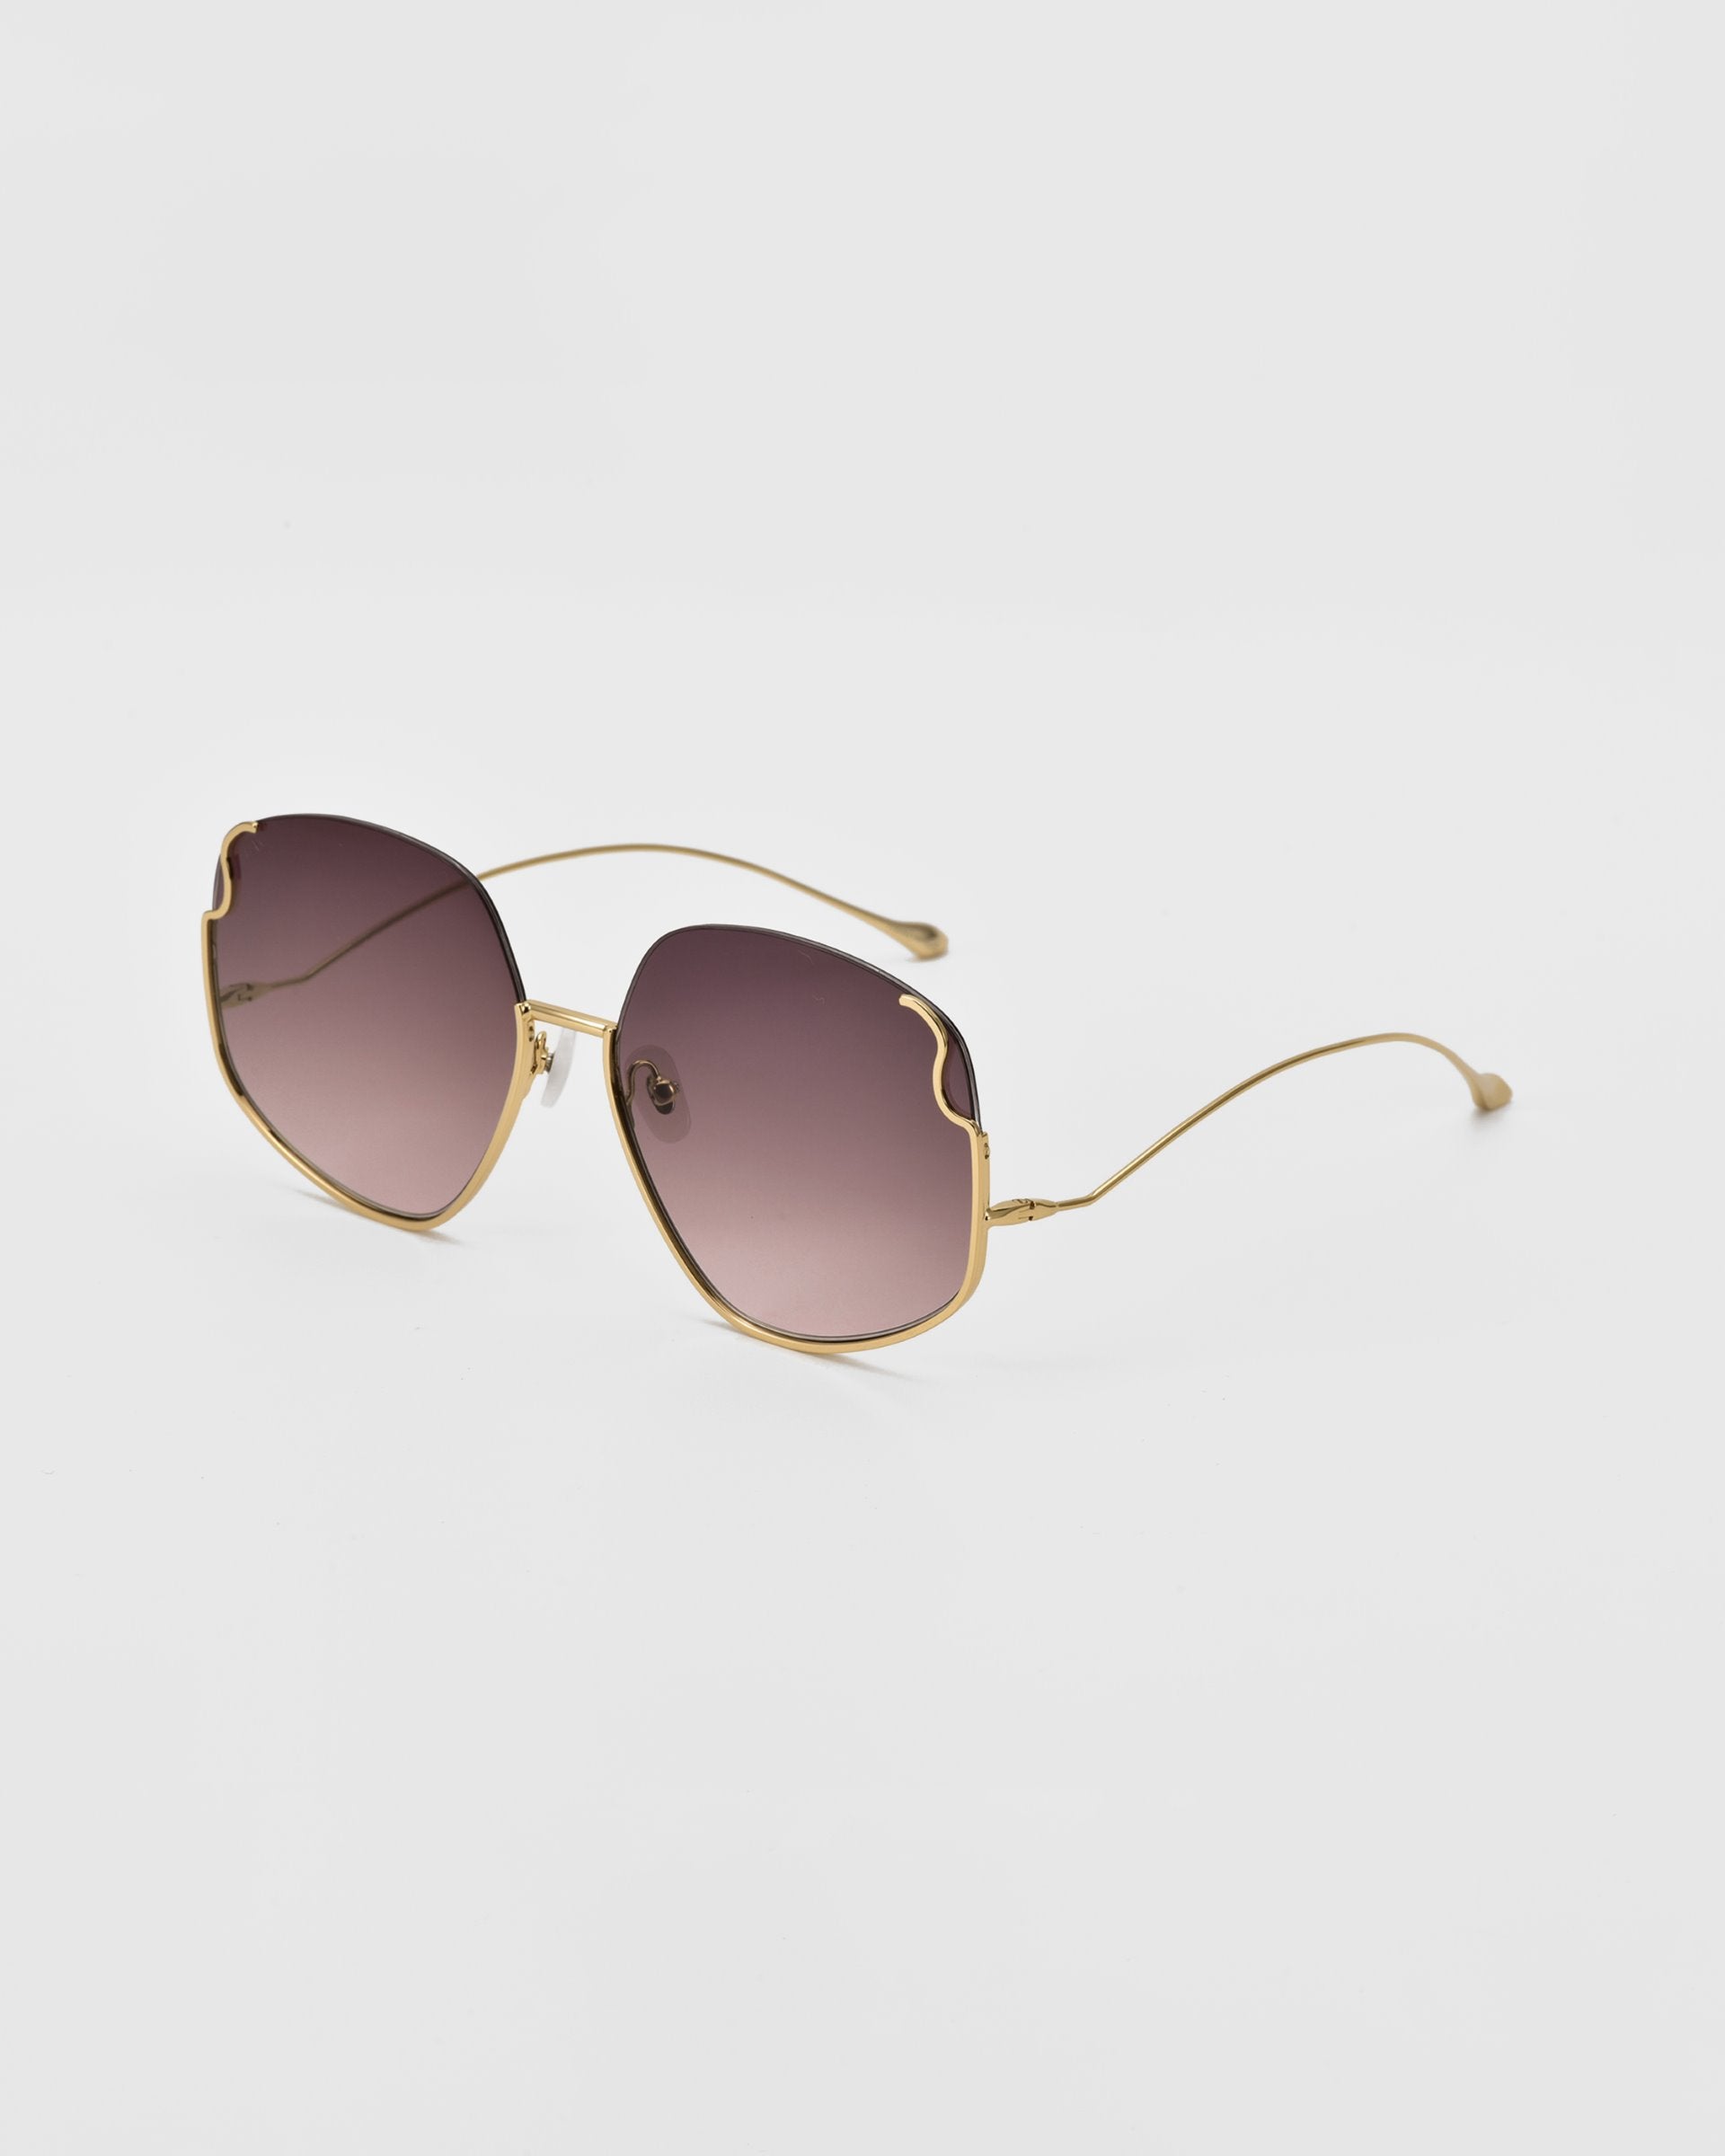 A pair of Drape sunglasses by For Art's Sake® with gold metal frames and gradient lenses. The oversized squared frame transitions from dark at the top to lighter at the bottom. These sunglasses feature a unique curved design on the upper corners of the lenses, complete with intricate metal detailing.